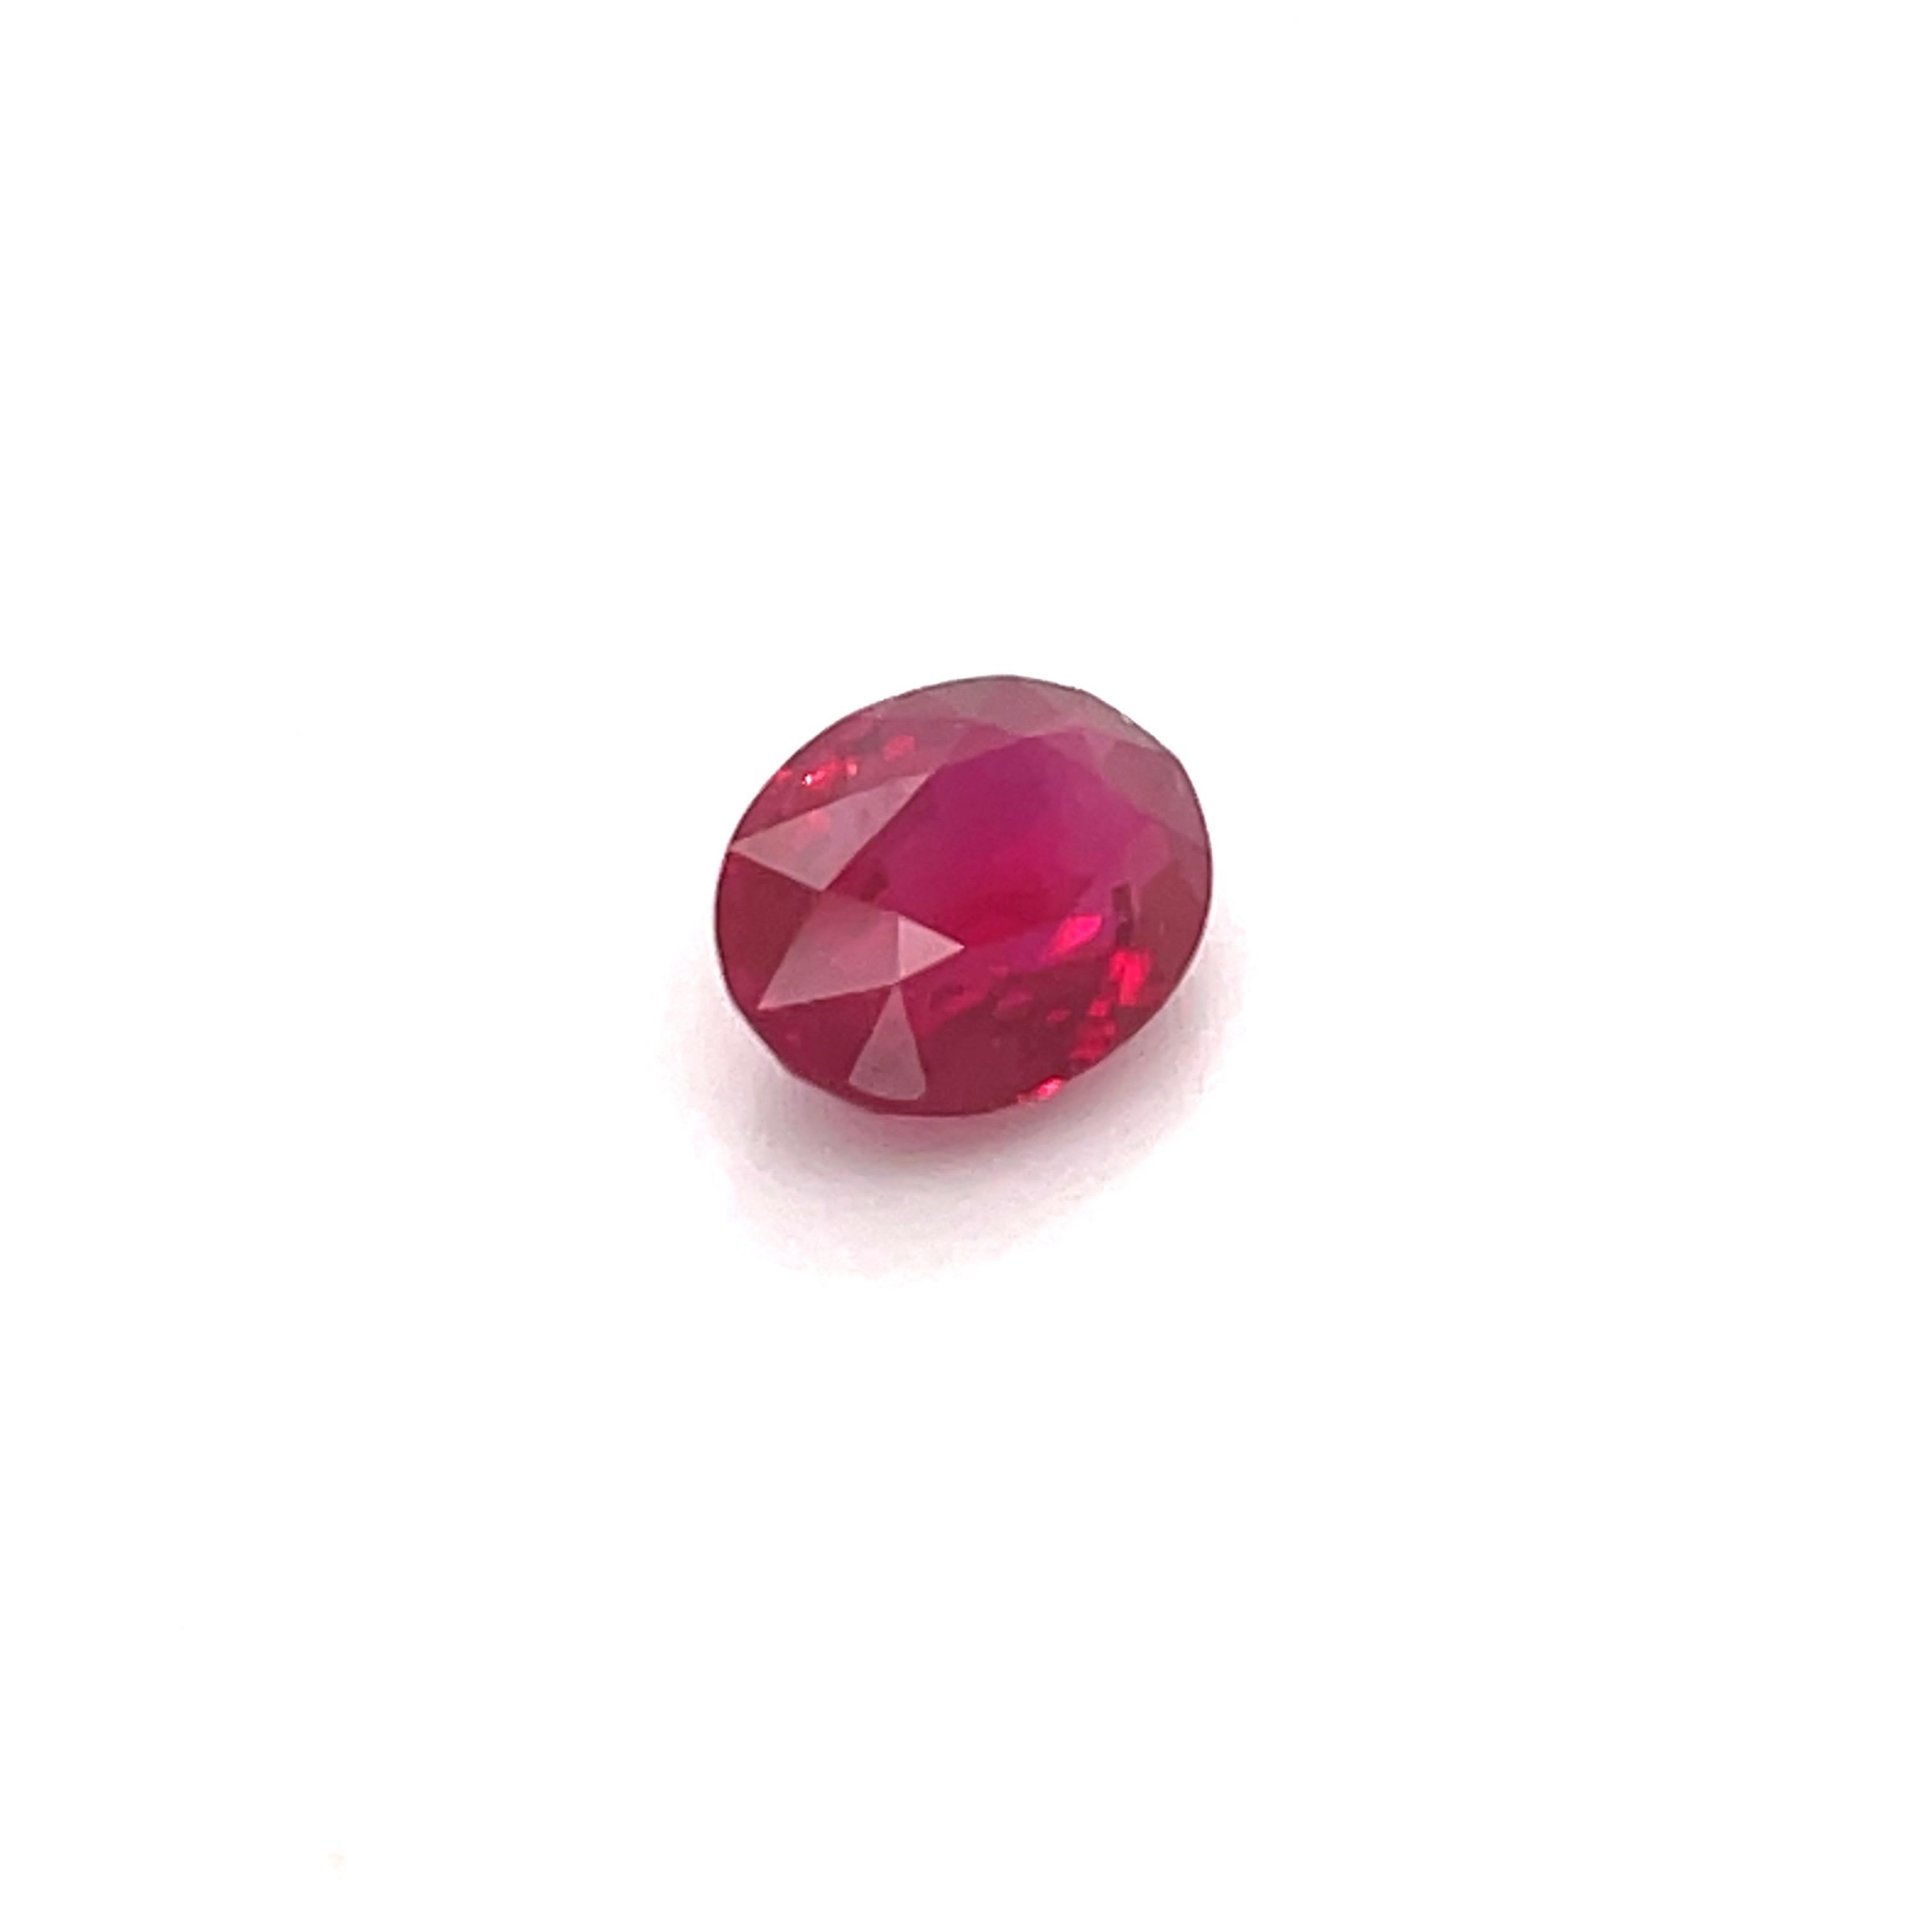 GRS & GIA Certified Oval shape red Ruby weighing 2.17 Carats and measuring 8.80 x 6.70 MM, Burma. Heated.
Can customize in a ring, pendant or bracelet. 
More Rubies in stock.
Email for more details. 